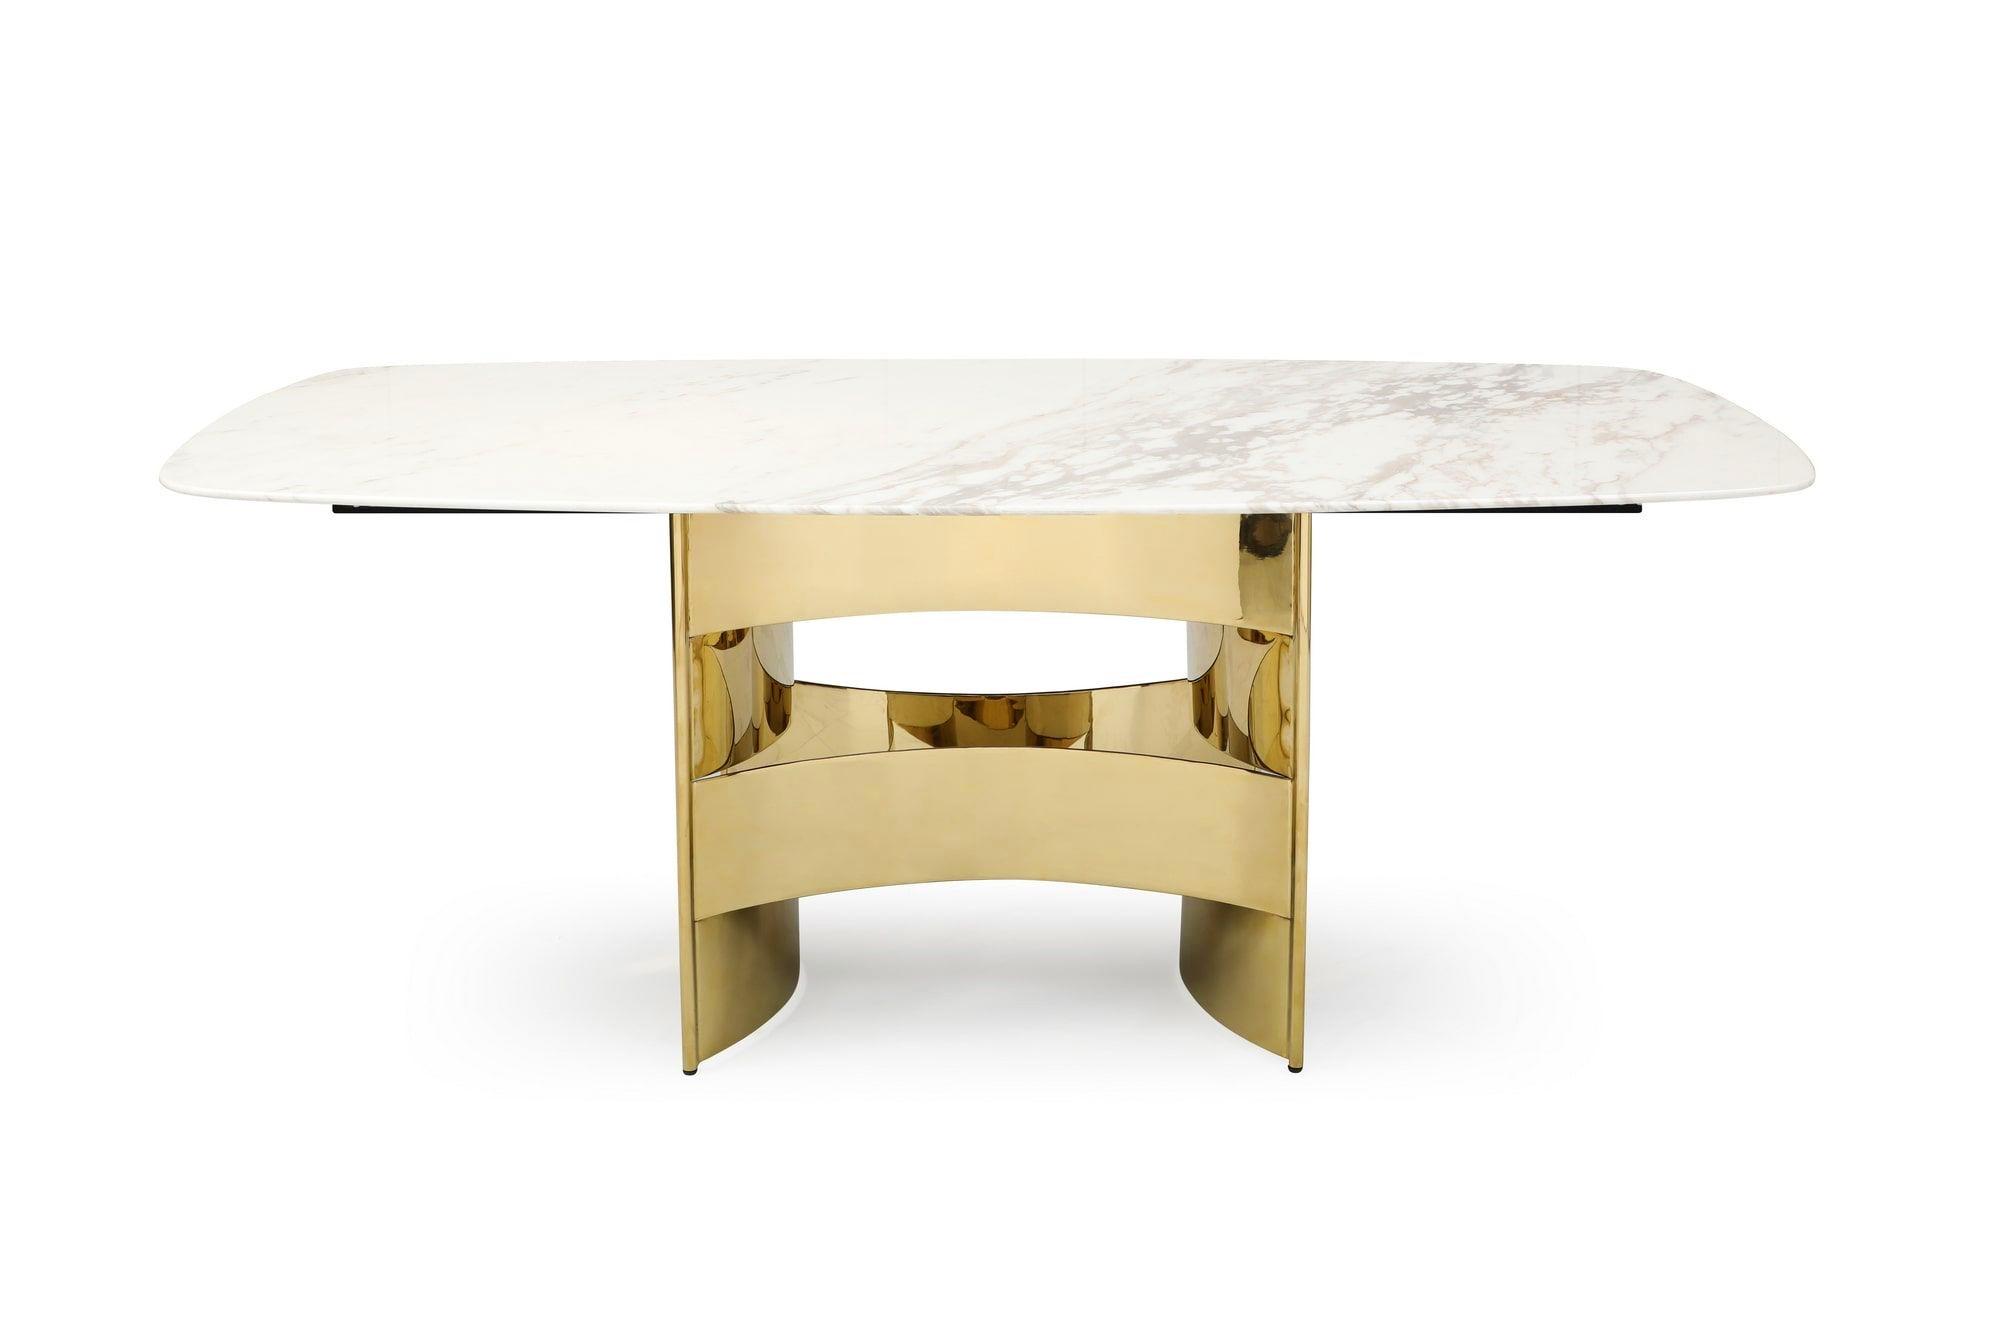 Contemporary, Modern Dining Table Marmot VGVCT005-22-WHT in White, Gold 